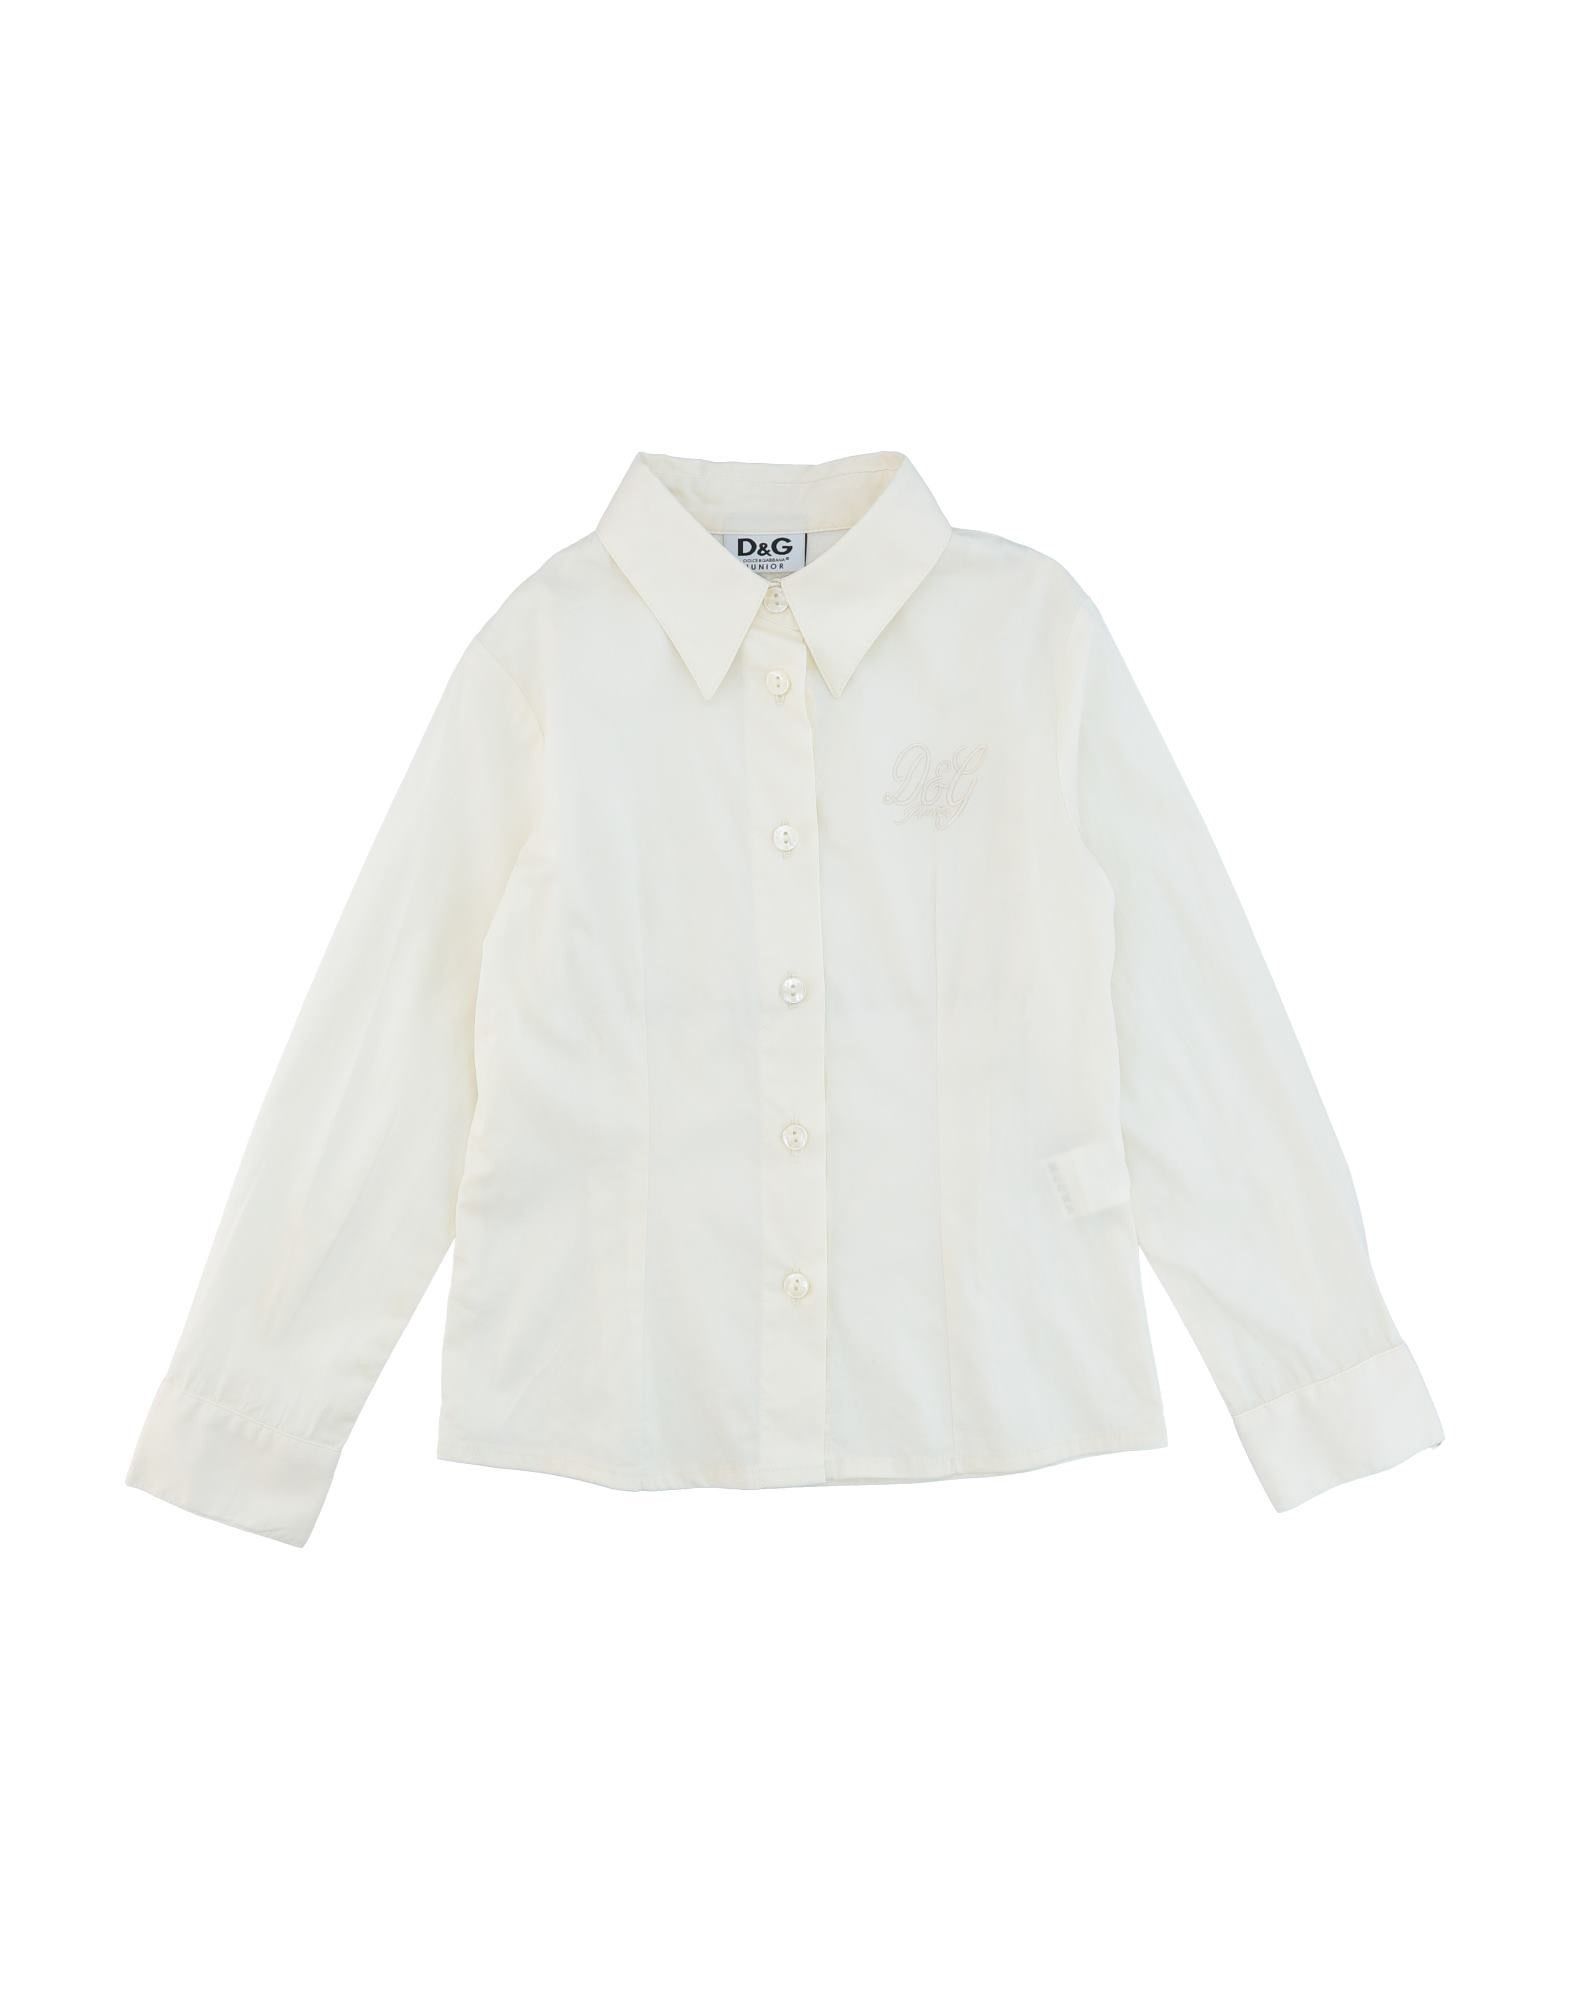 D & G Kids' Shirts In Ivory